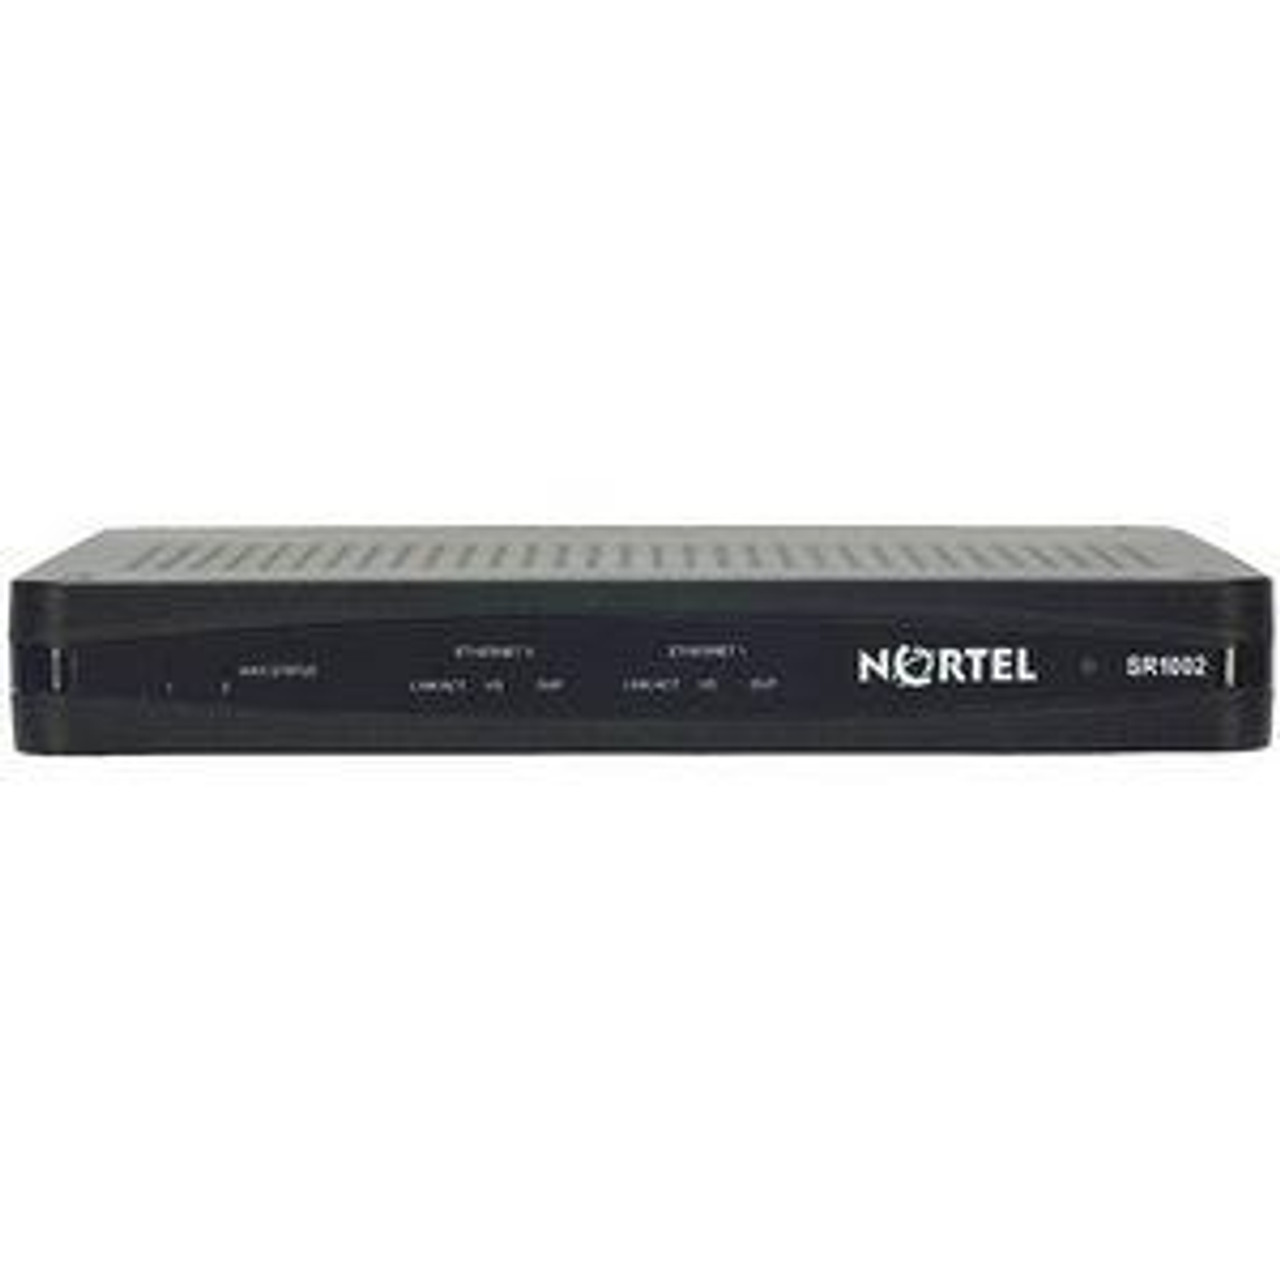 SR2101010E5 Nortel 1002 Secure Router with 2-ports Active 2 x E1 WAN, 2 x 10/100Base-TX LAN (Refurbished)